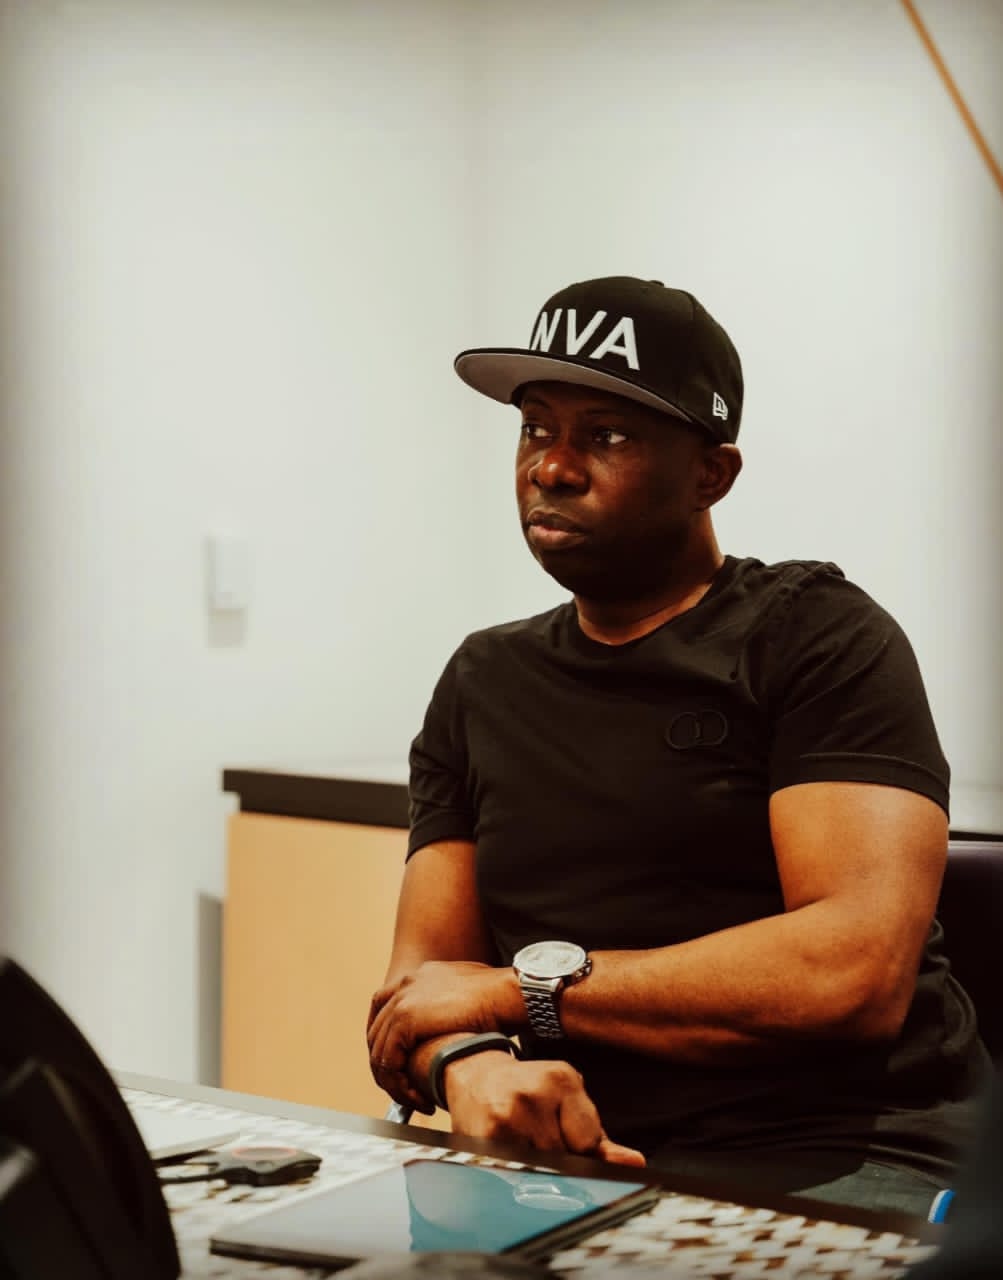 Meet UK born Chris Nathaniel, of Nigerian parentage, founder of  NVA Sports and Entertainment agency, which manages global sporting superstars and international football stars*